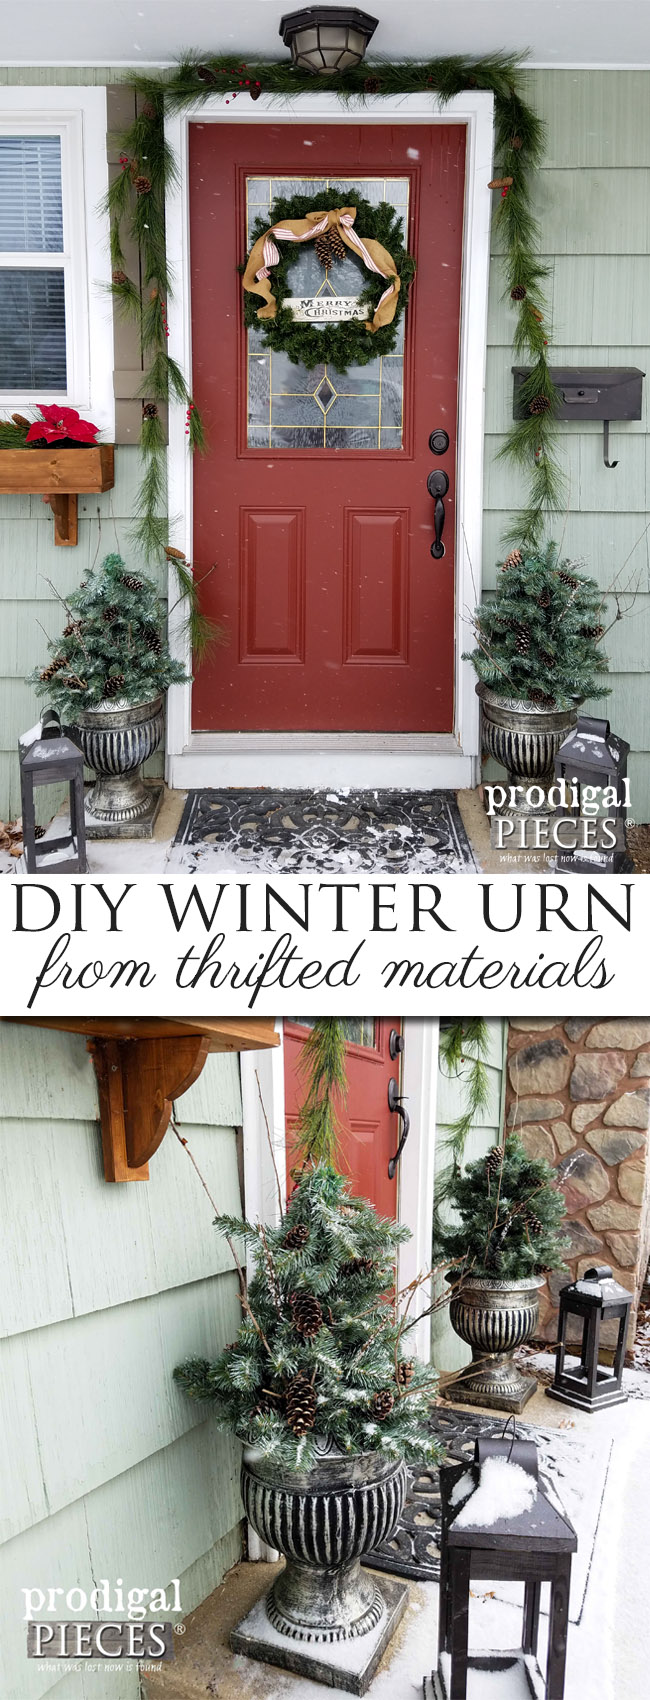 Create these Winter Urns from Thrifted and Repurposed Materials. Budget-friendly Christmas Decor by Prodigal Pieces | prodigalpieces.com